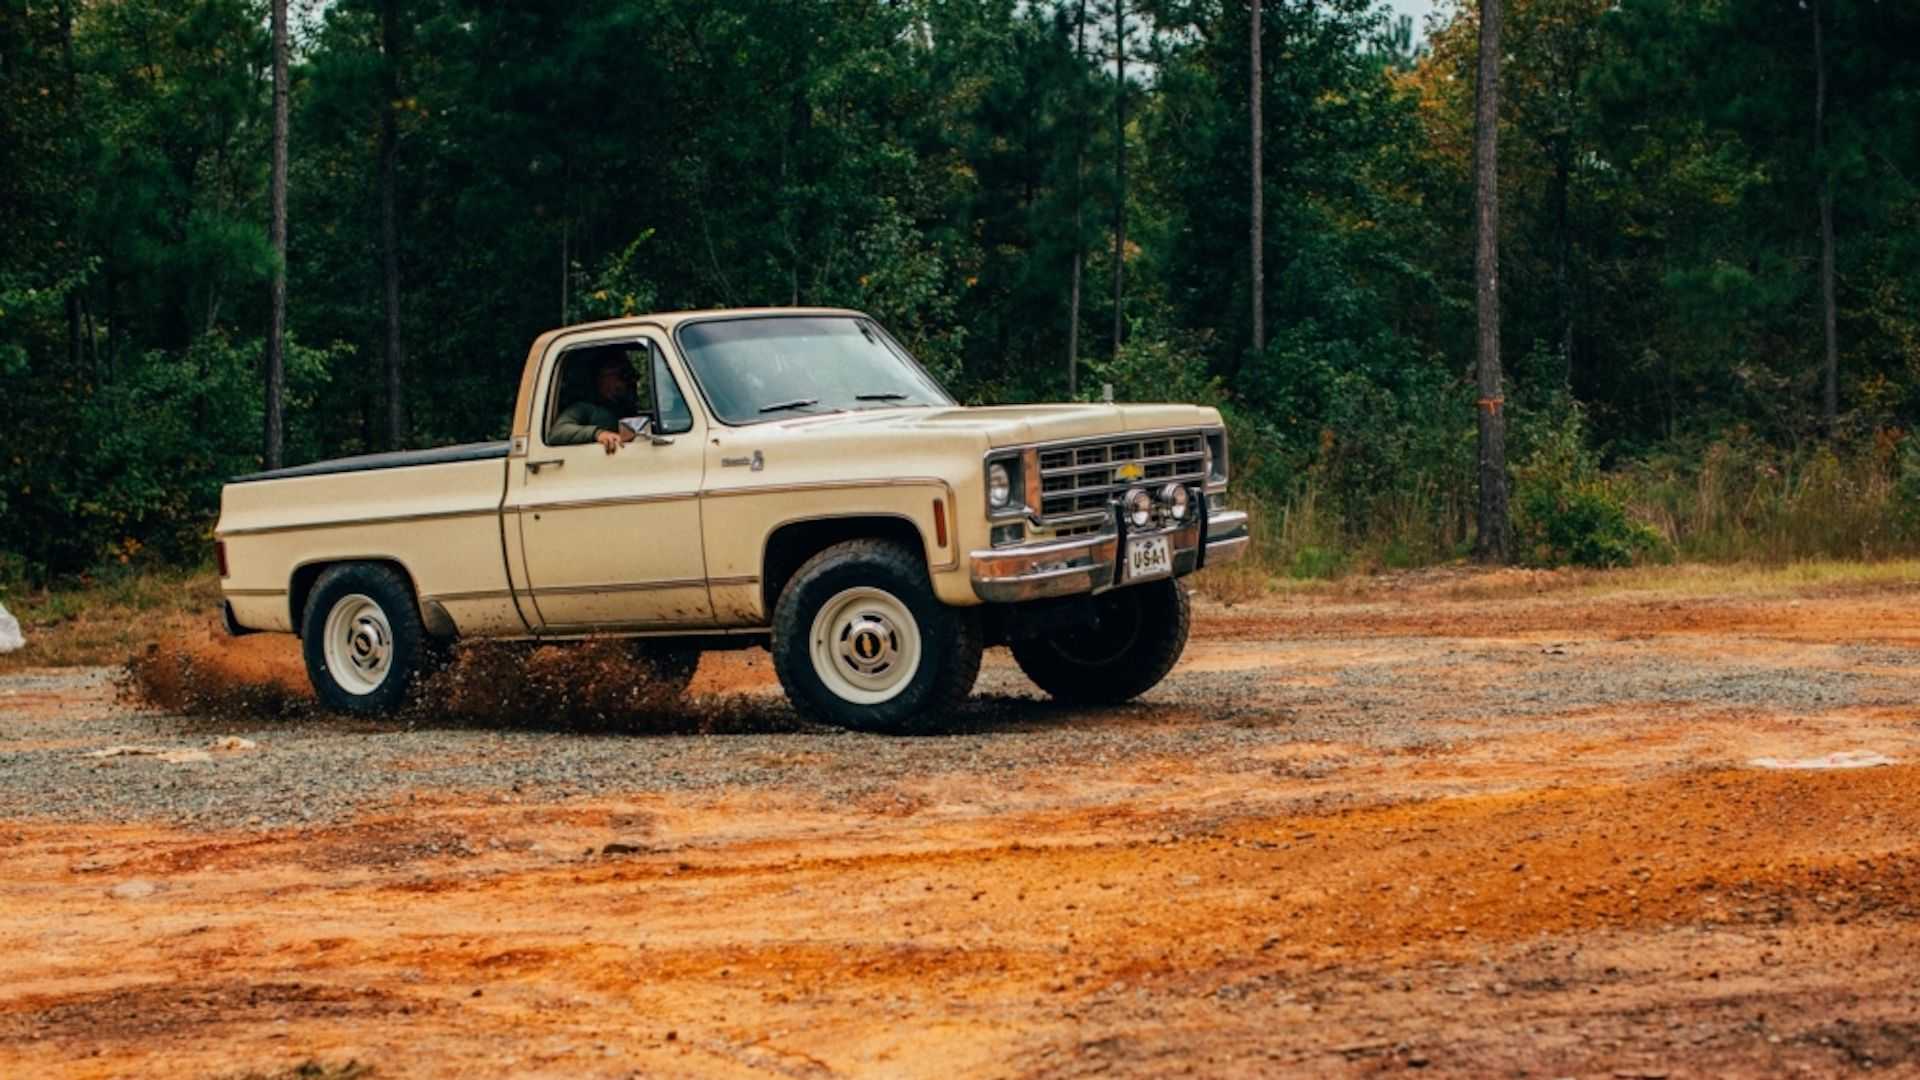 This New Chevy Square Body Truck Takes Away The Pain Of